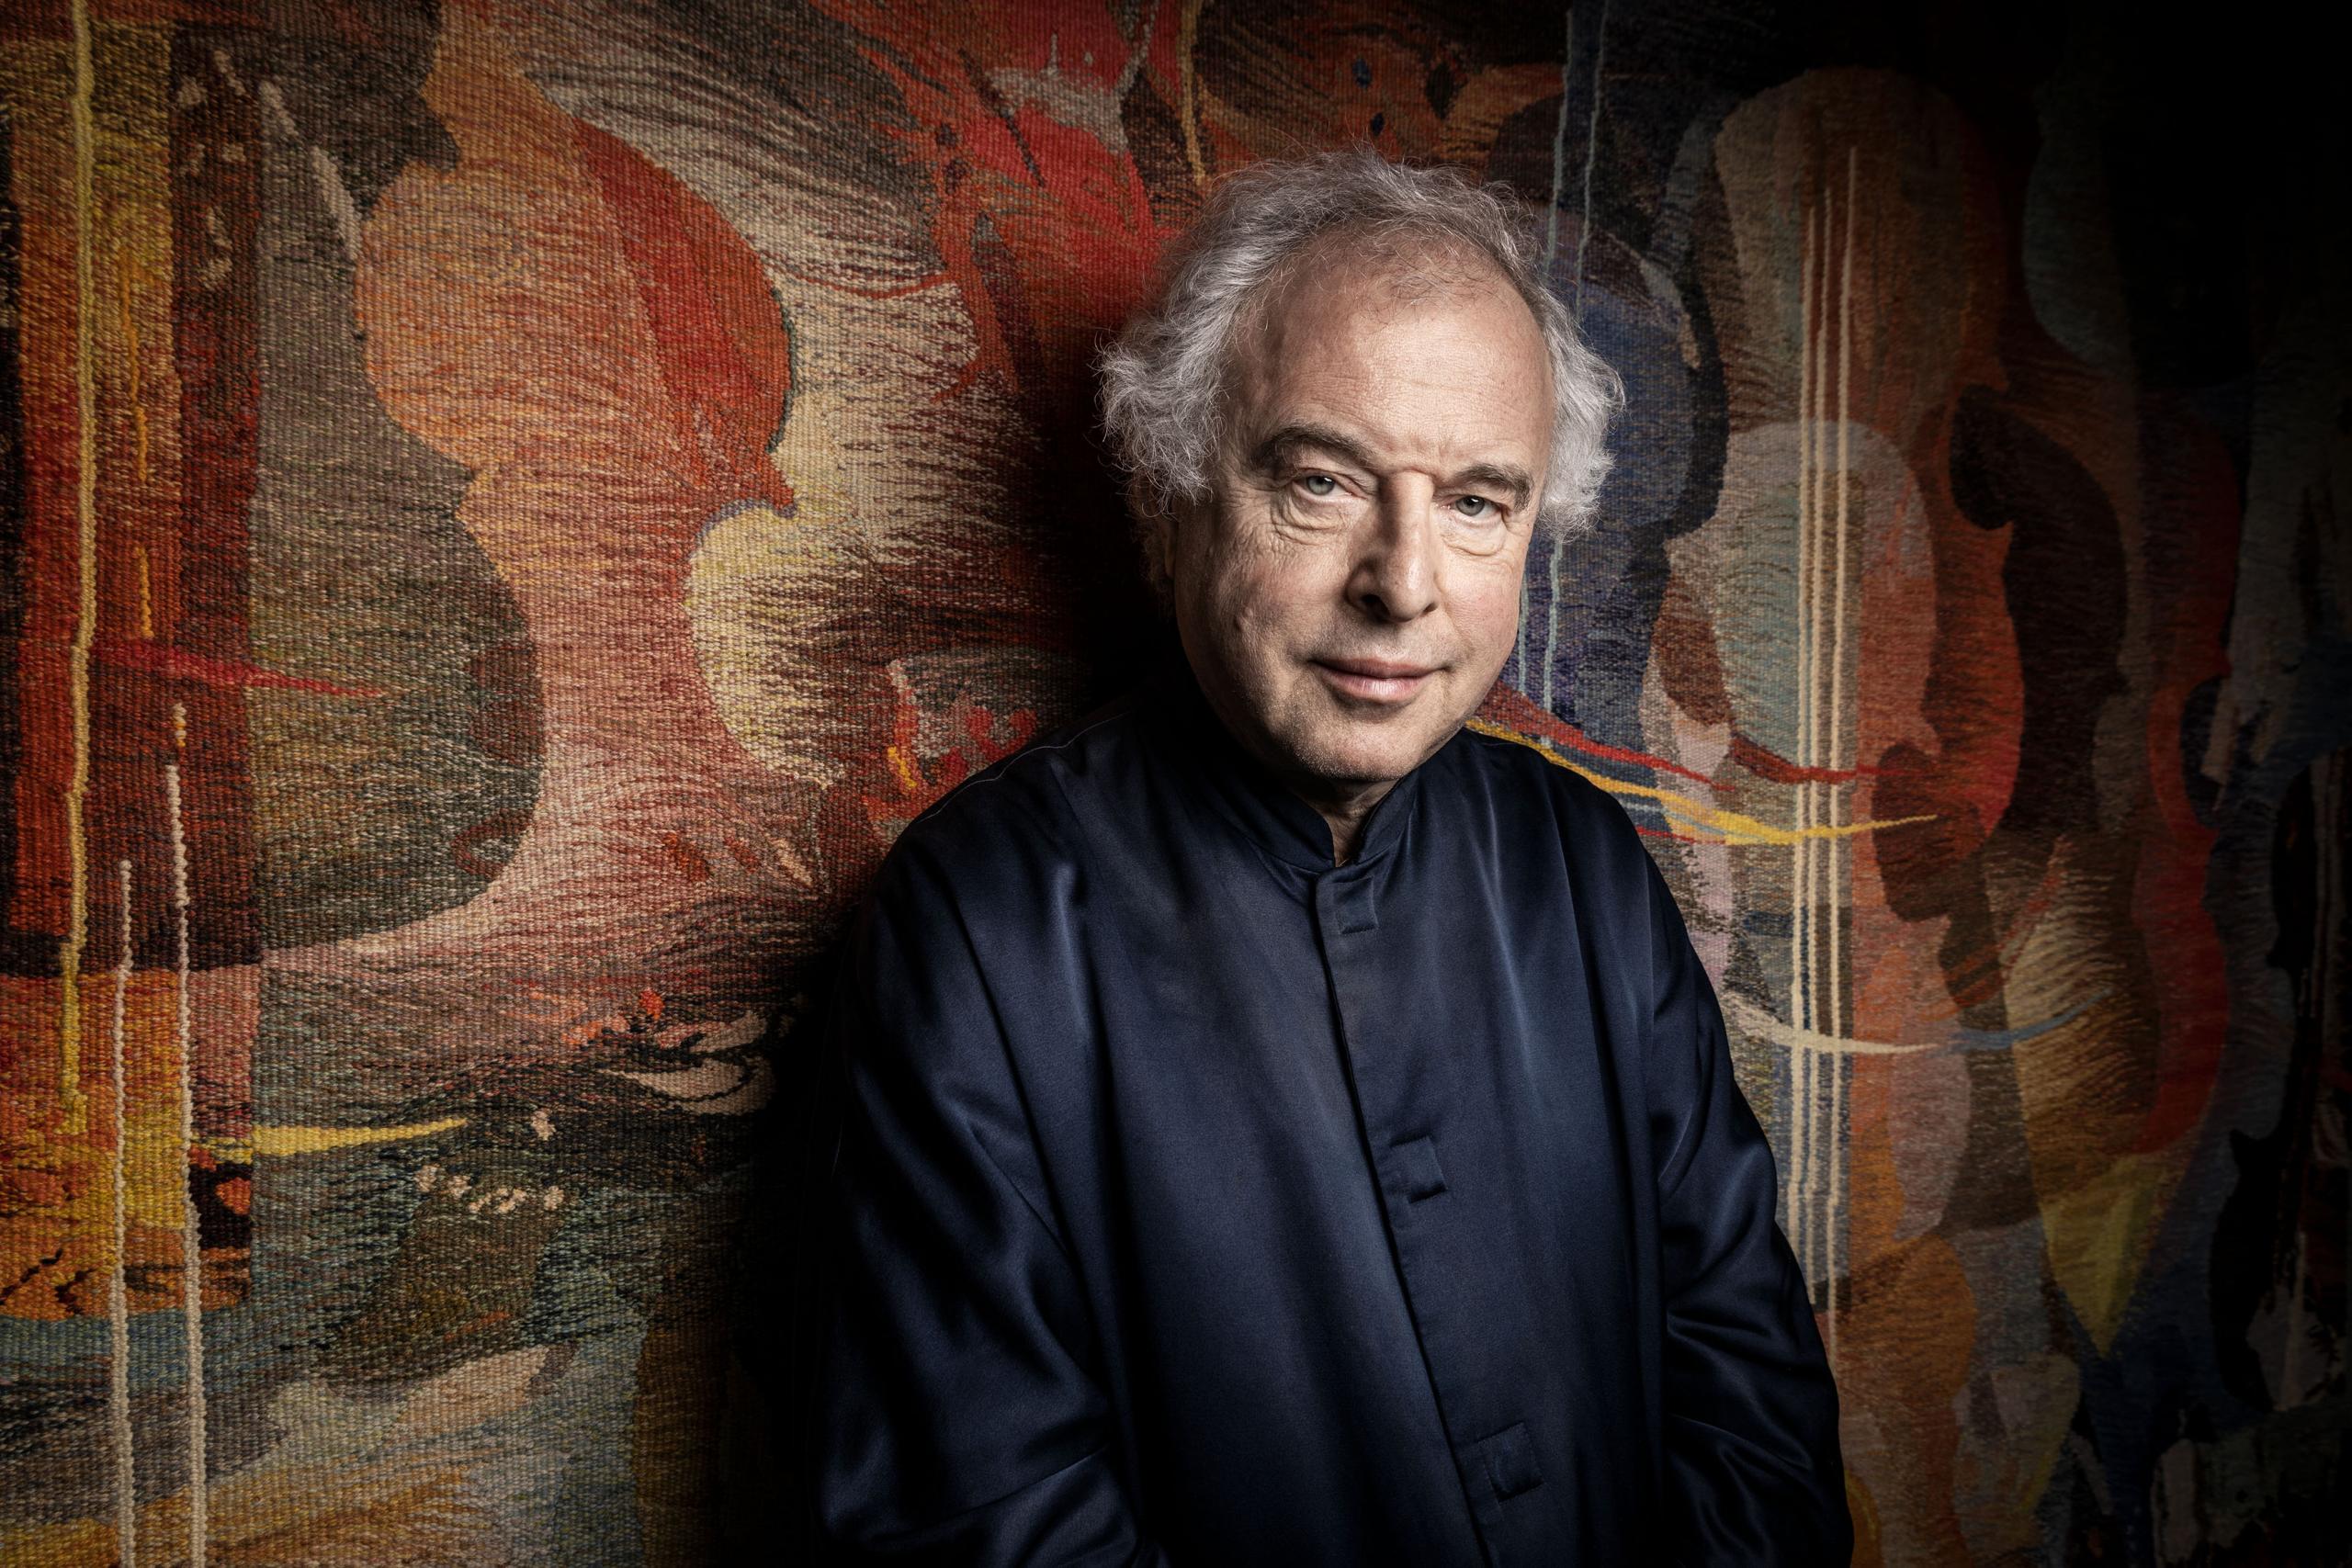 Portrait of the pianist and conductor Sir András Schiff. He wears a black shirt and stands in front of a patterned wall.